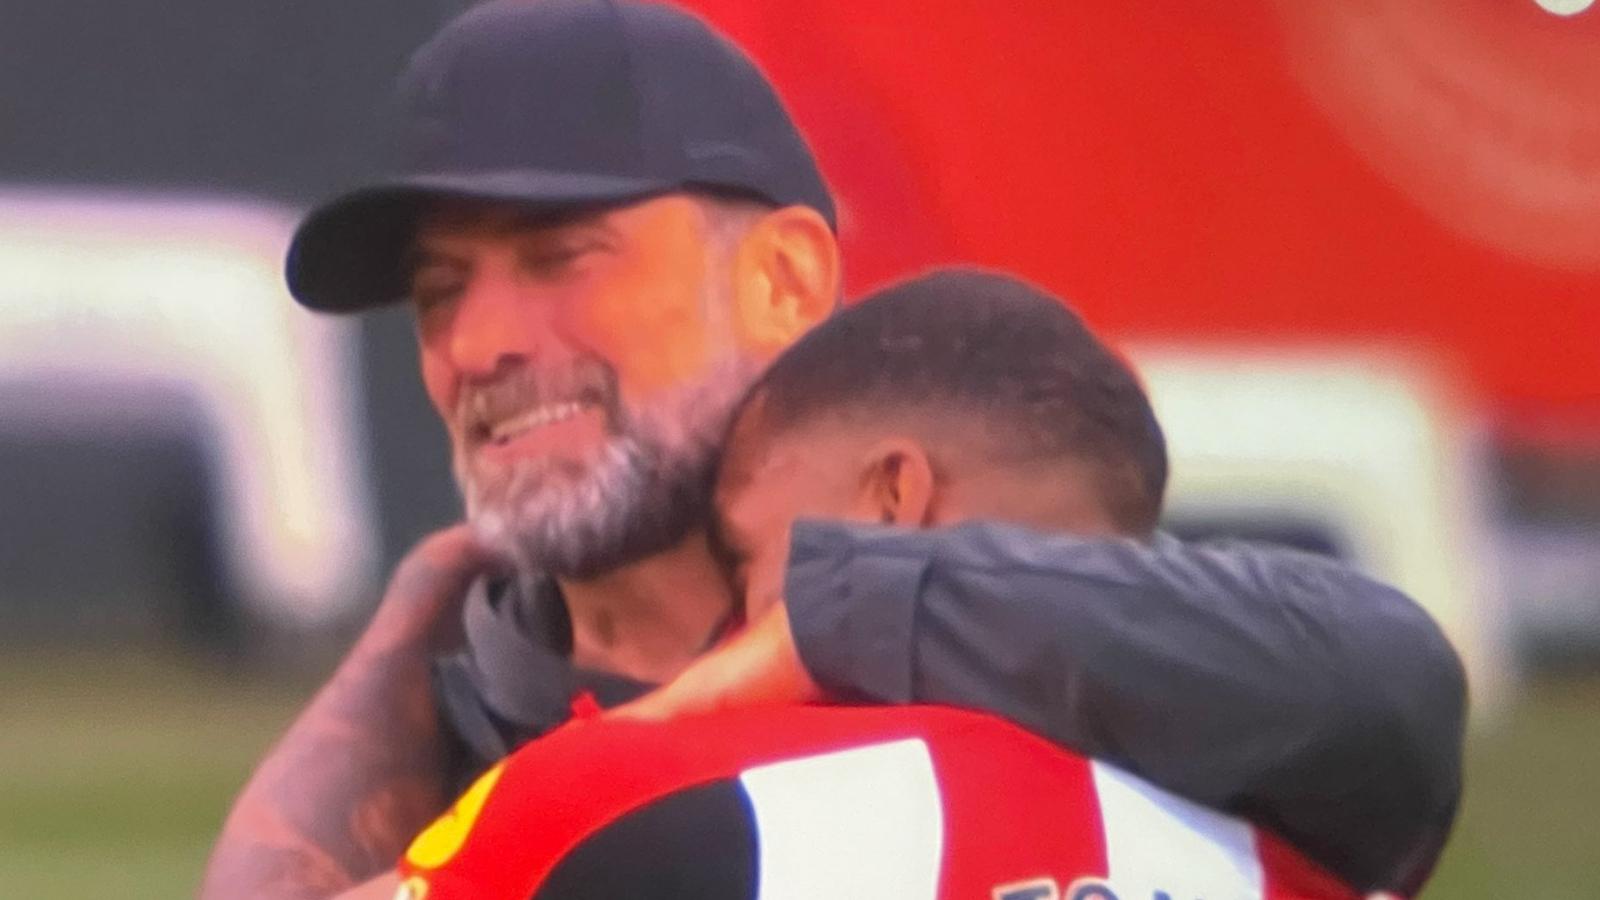 Klopp and Toney embraced at full-time